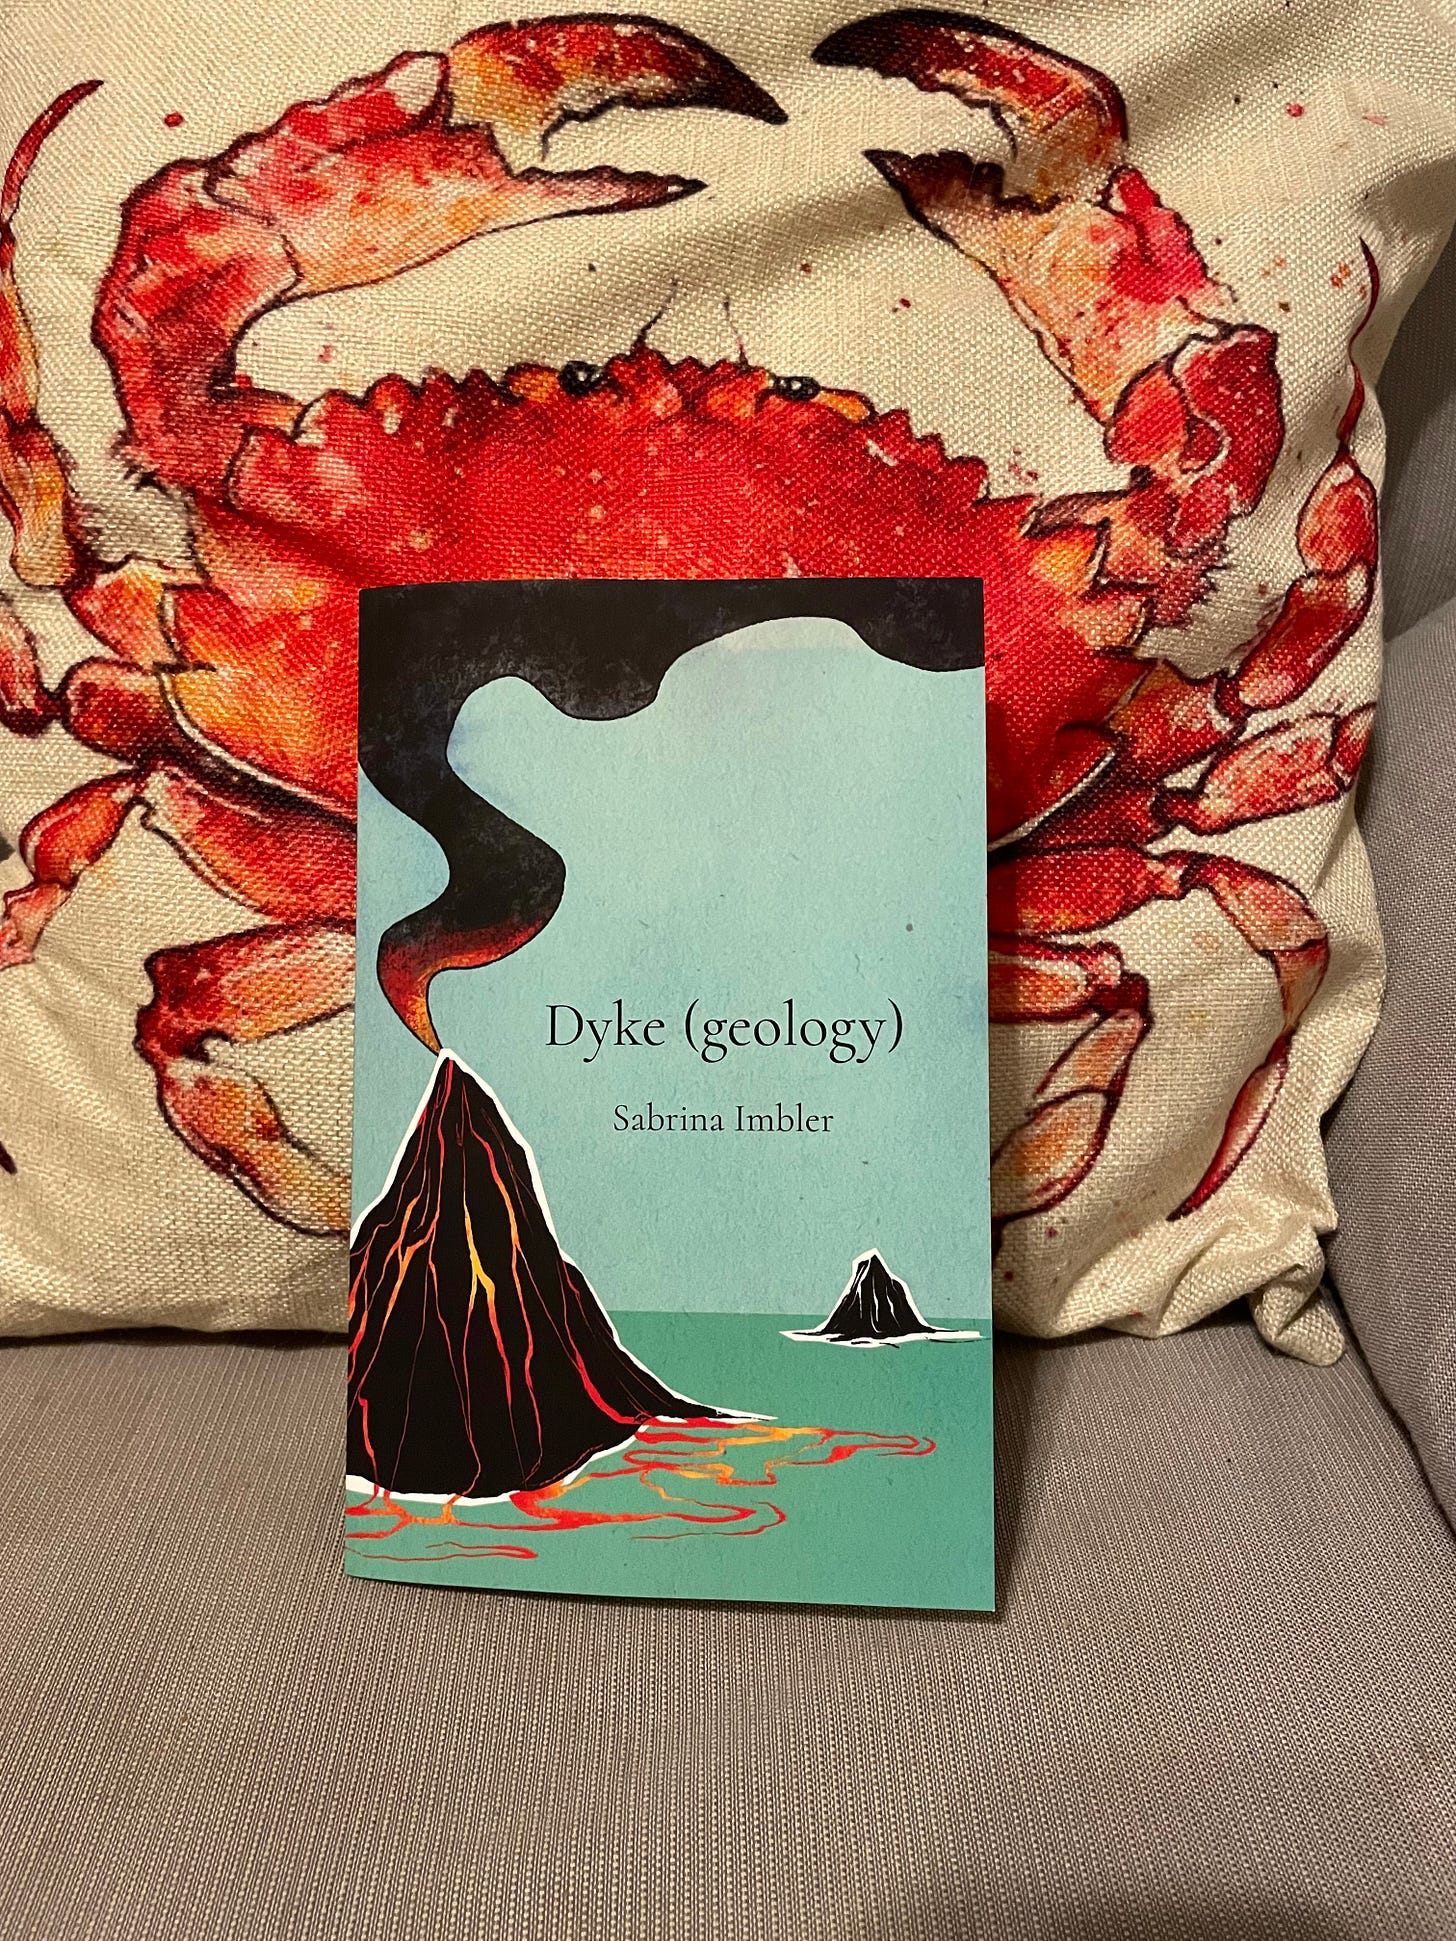 book: 'Dyke (geology)' by Sabrina Imbler against the background of a red crab pillowcase